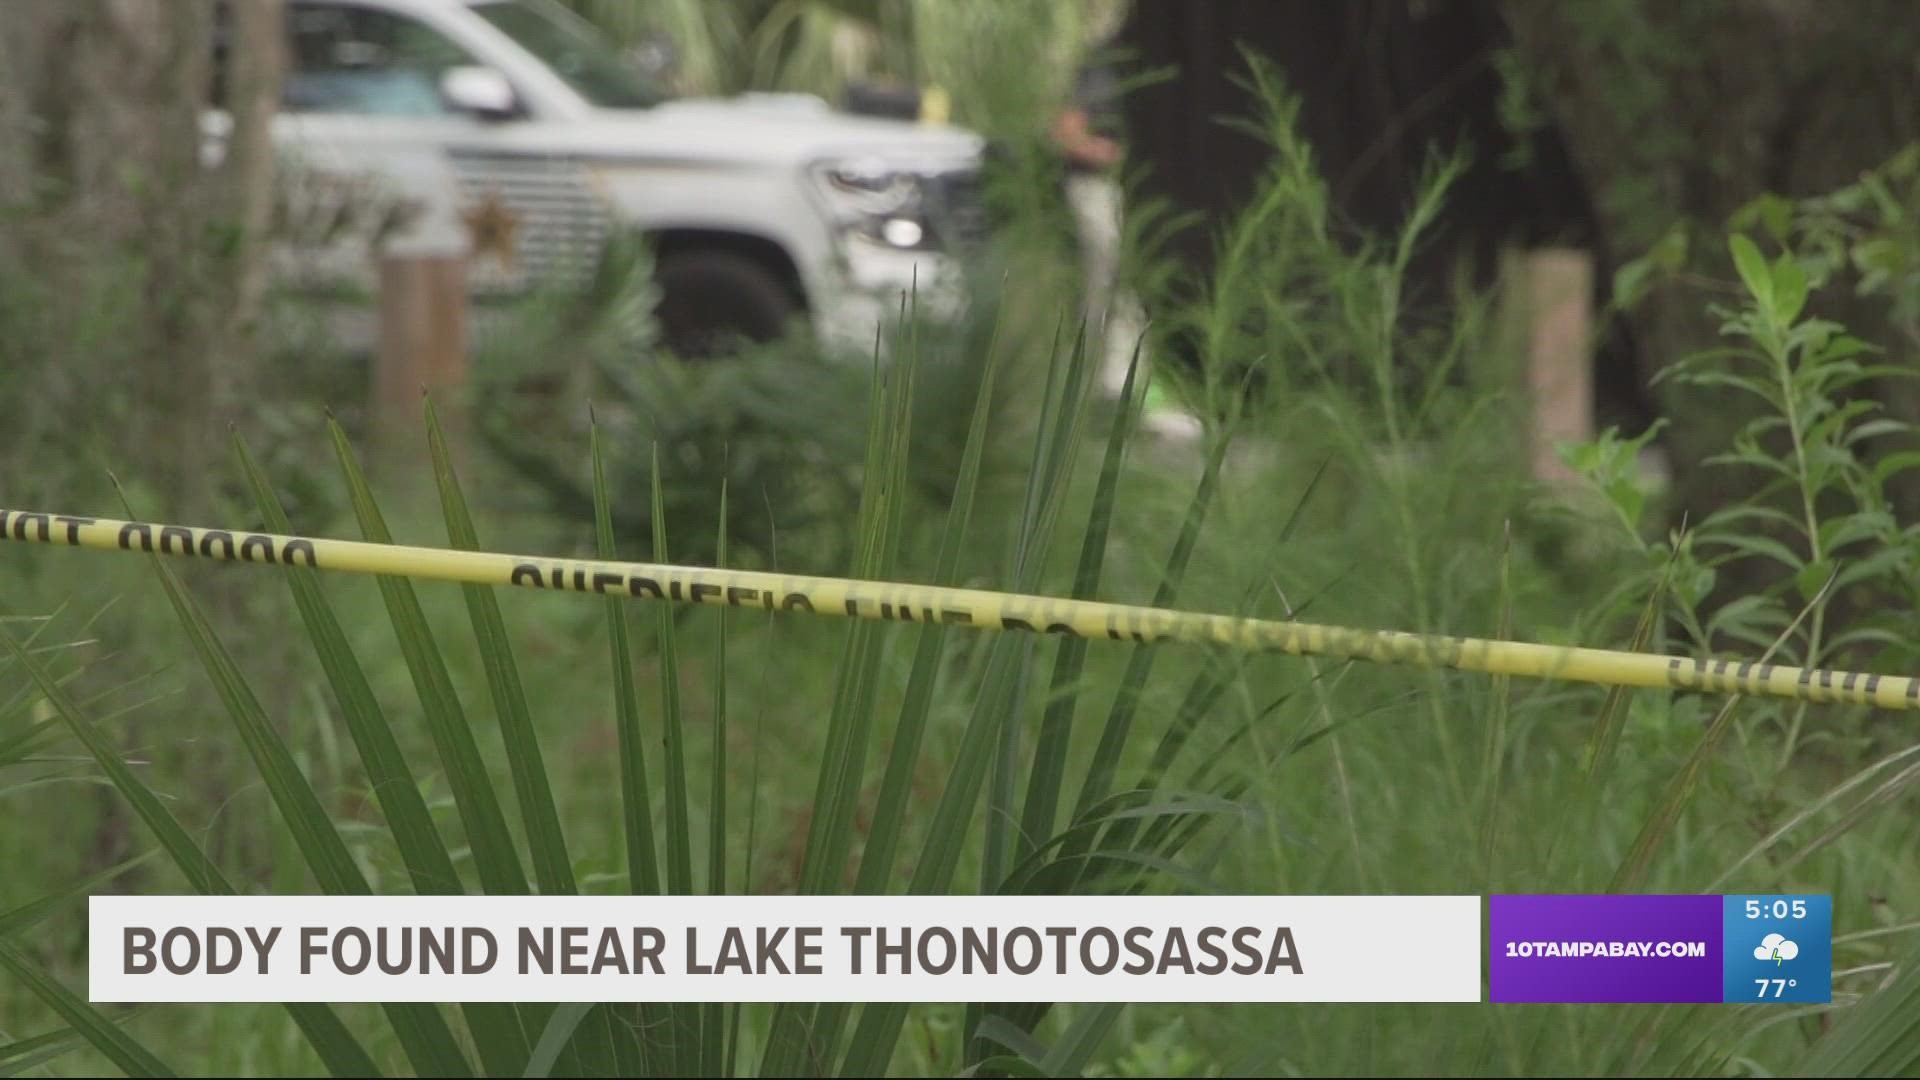 The discovery of a man's body Tuesday near Lake Thonotosassa in Hillsborough County is now considered a homicide, the sheriff's office said.